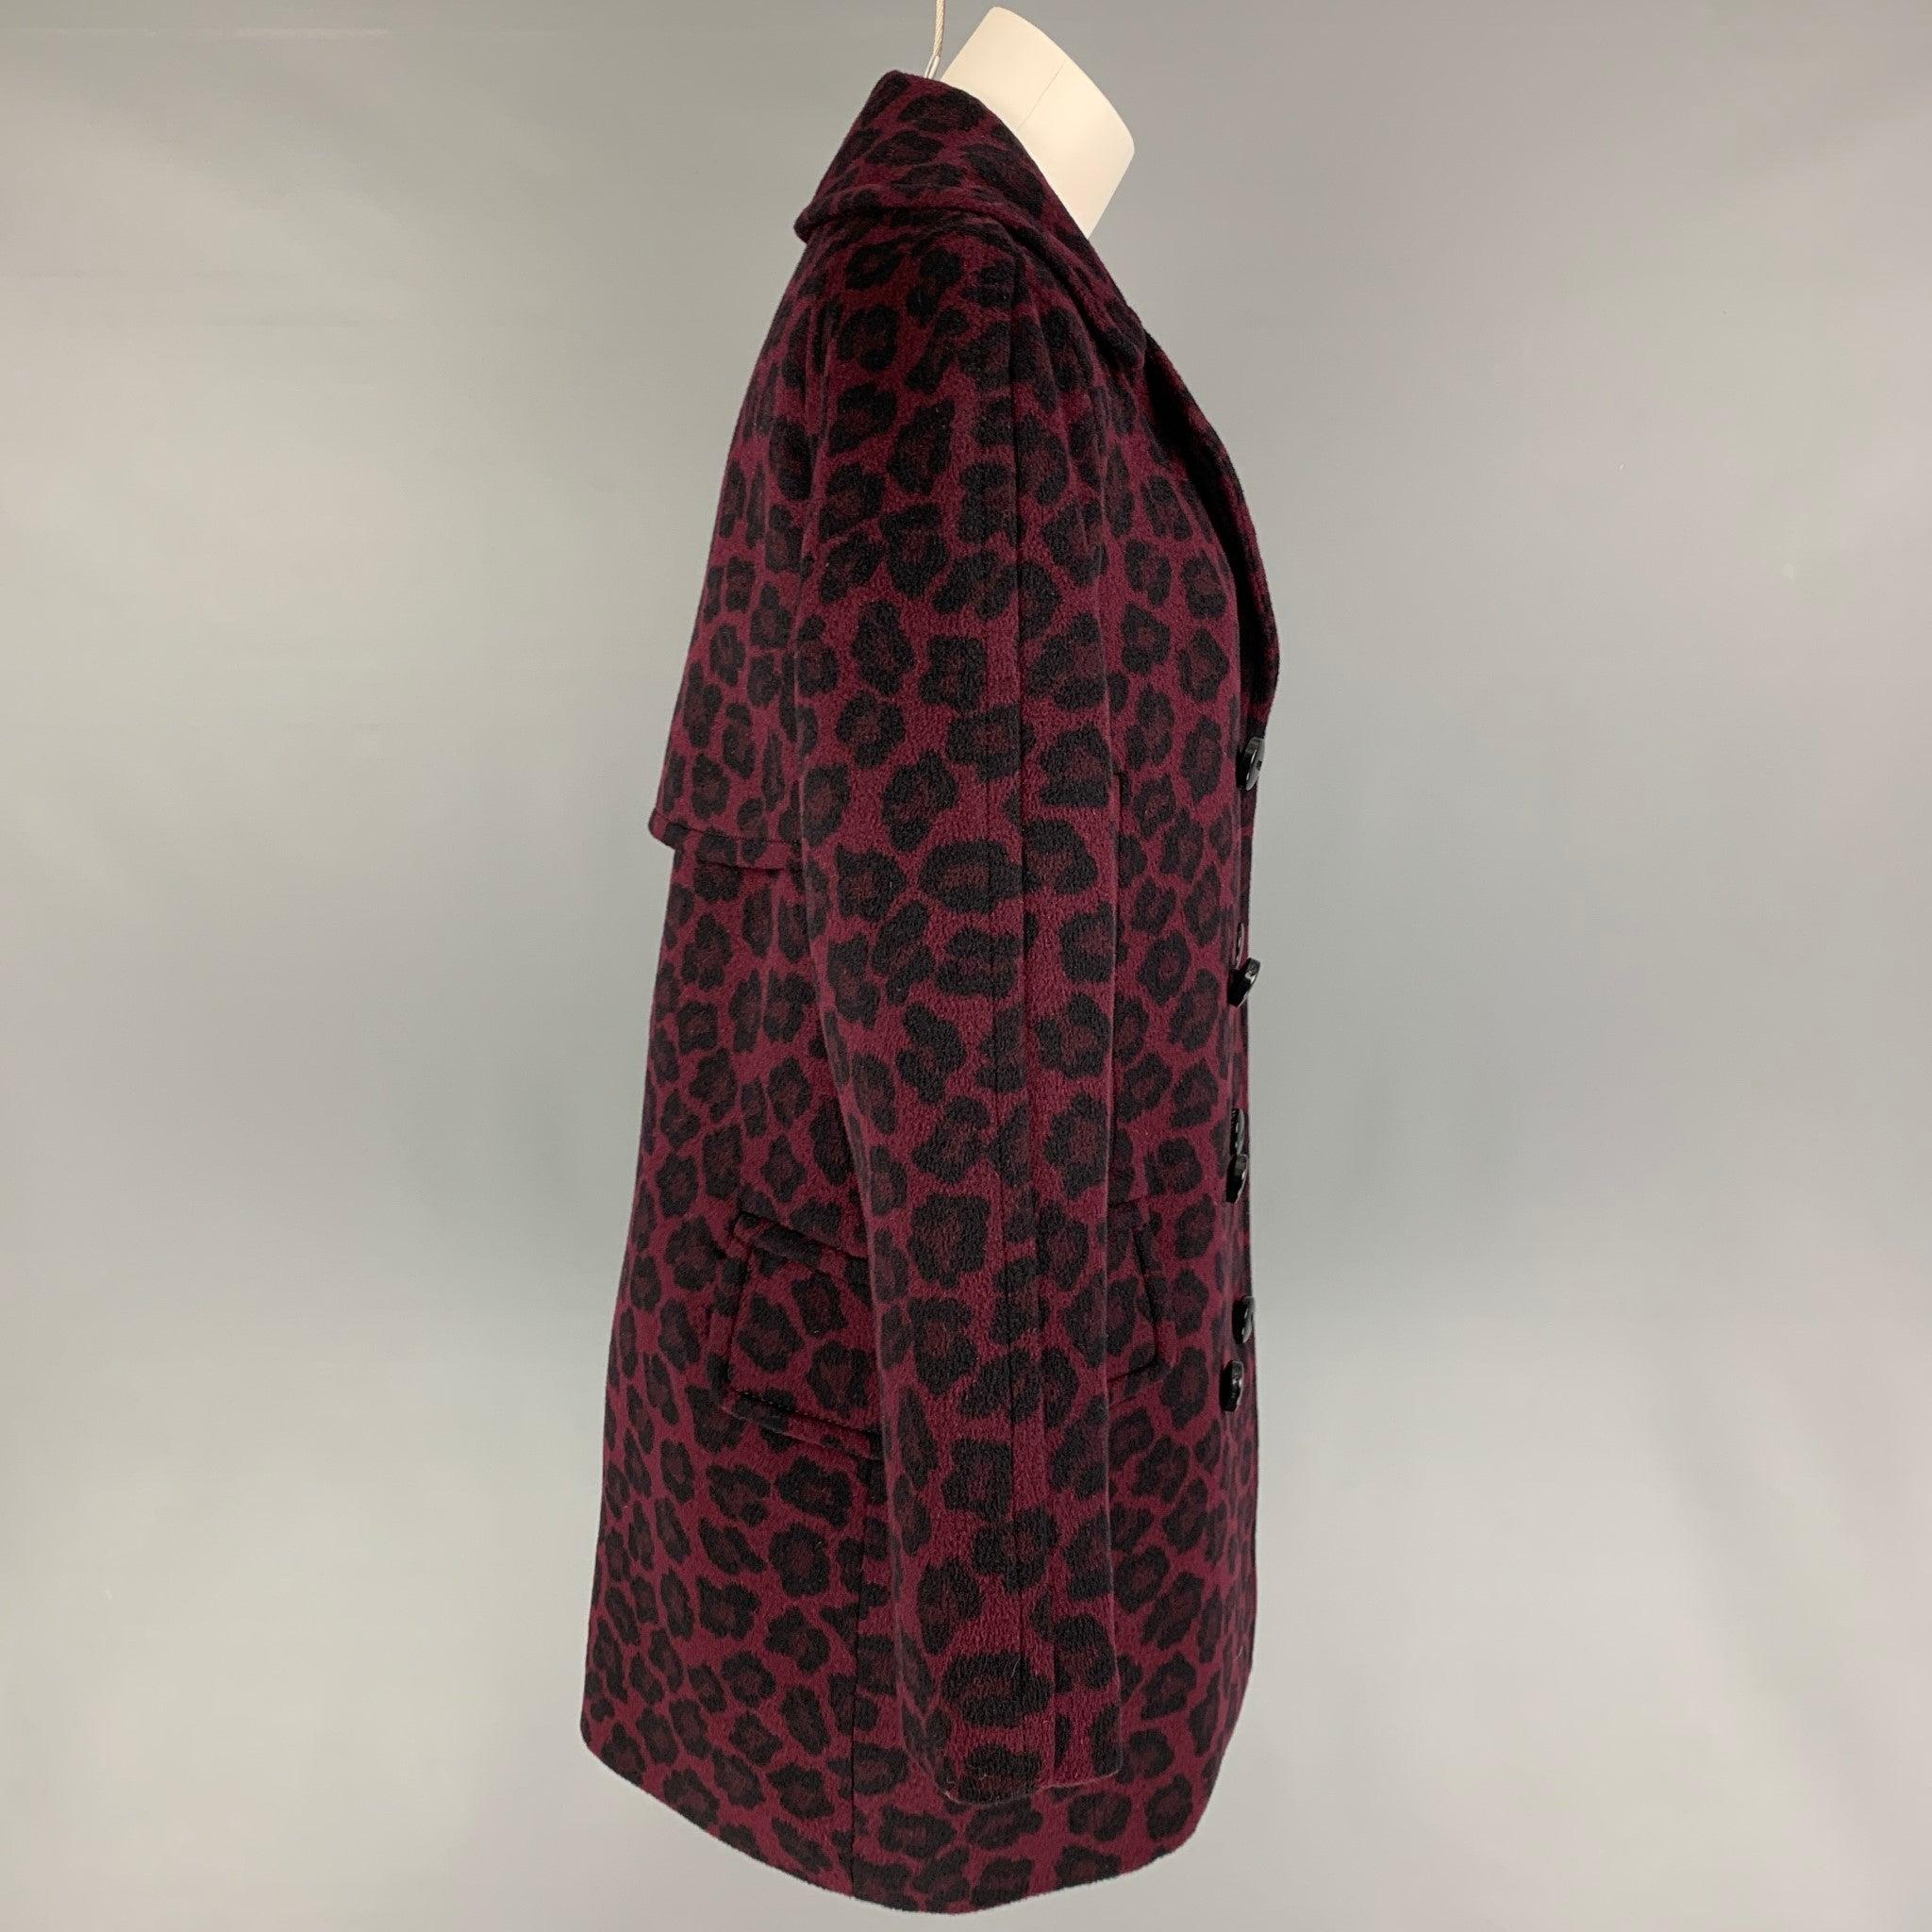 COACH coat comes in a burgundy & black animal print wool with a full liner featuring a notch lapel, flap pockets, and a double breasted closure.
Very Good
Pre-Owned Condition. 

Marked:   M  

Measurements: 
 
Shoulder: 17.5 inches  Bust: 40 inches 